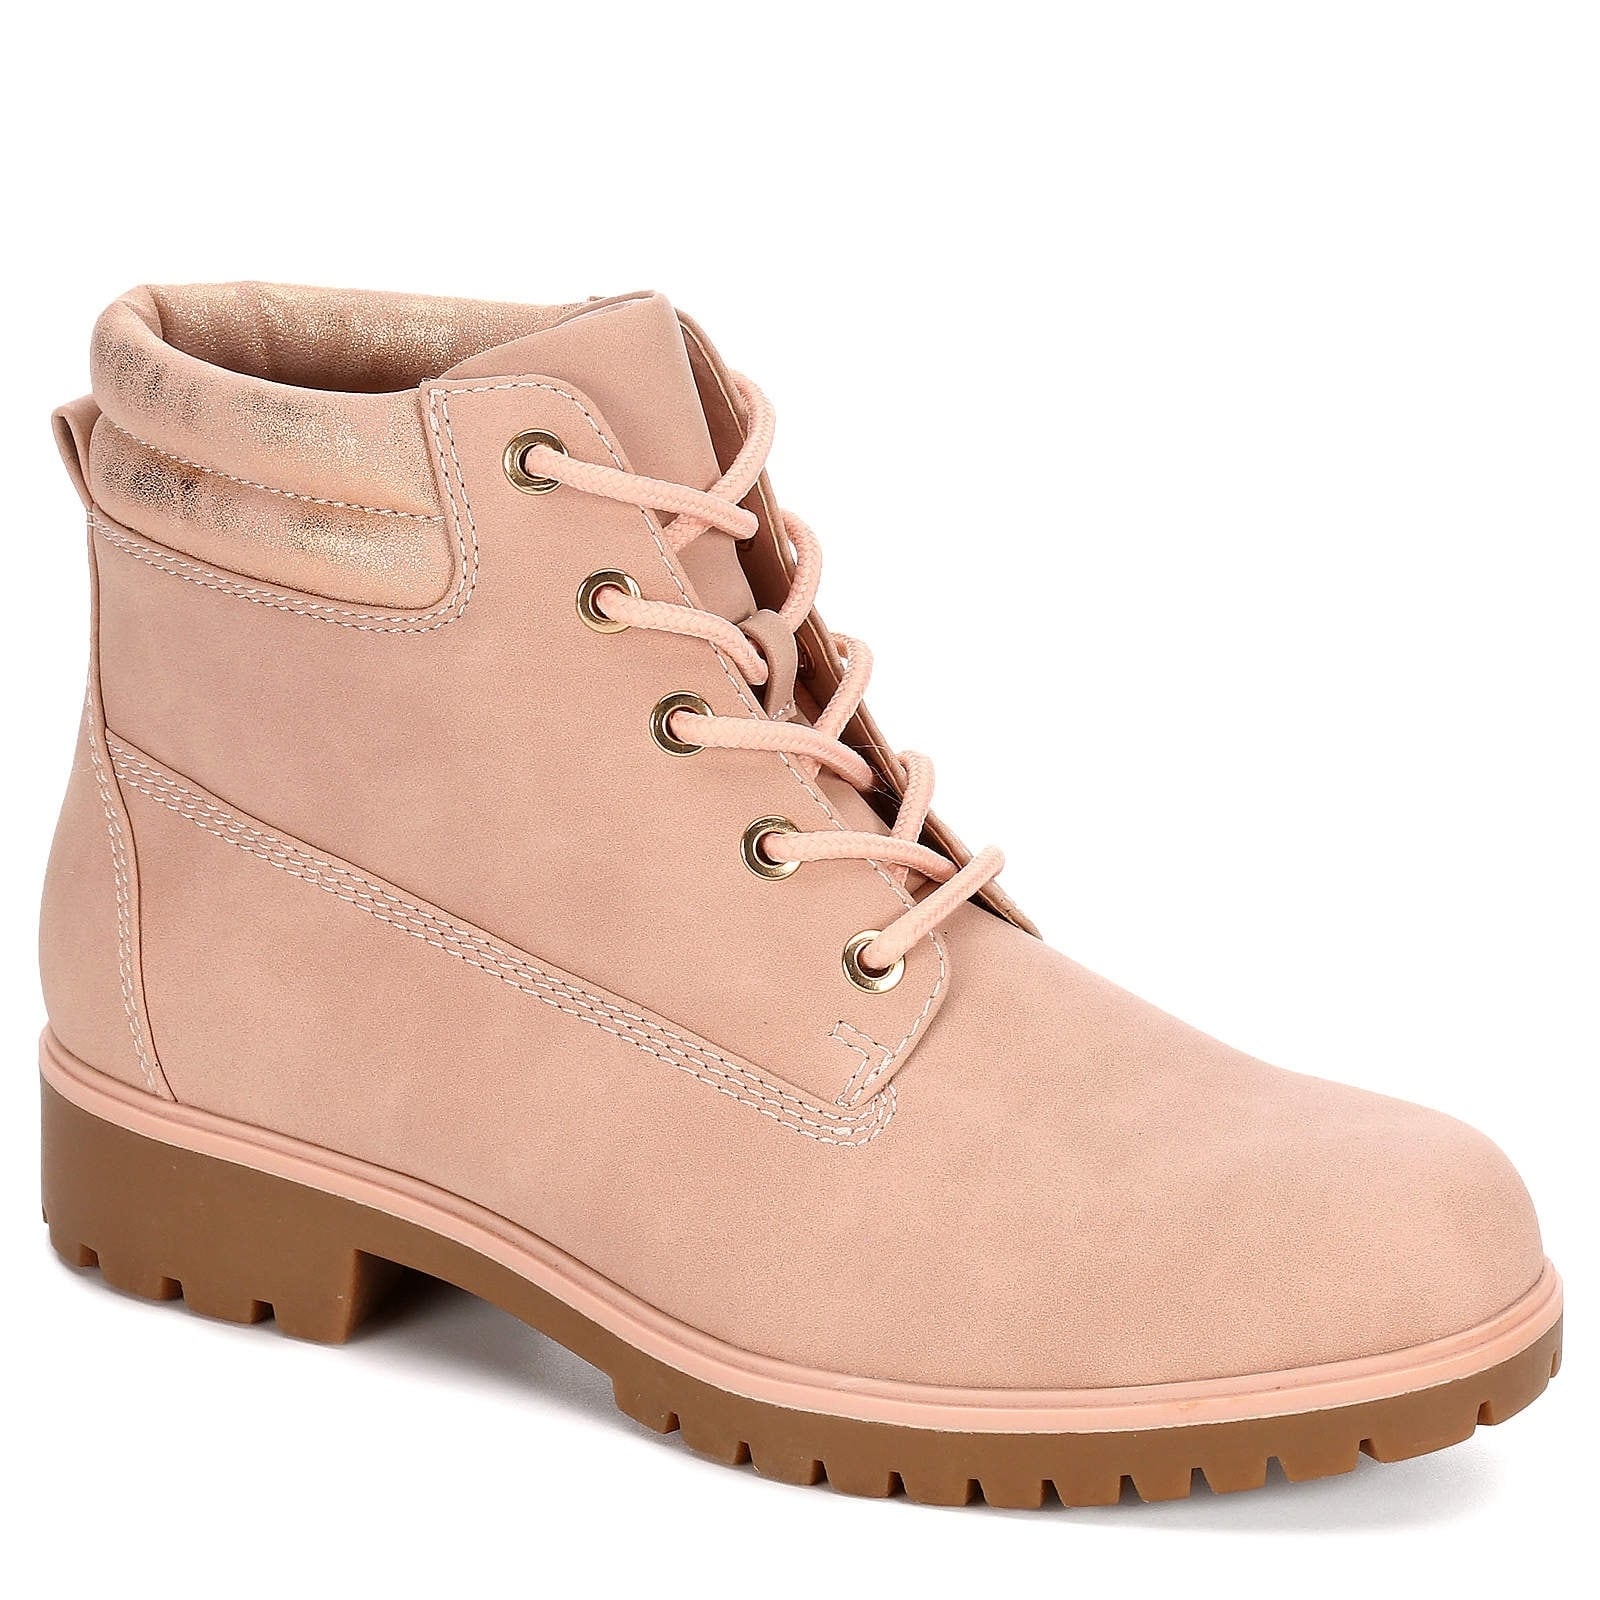 Boot Shoes, Pale Pink 